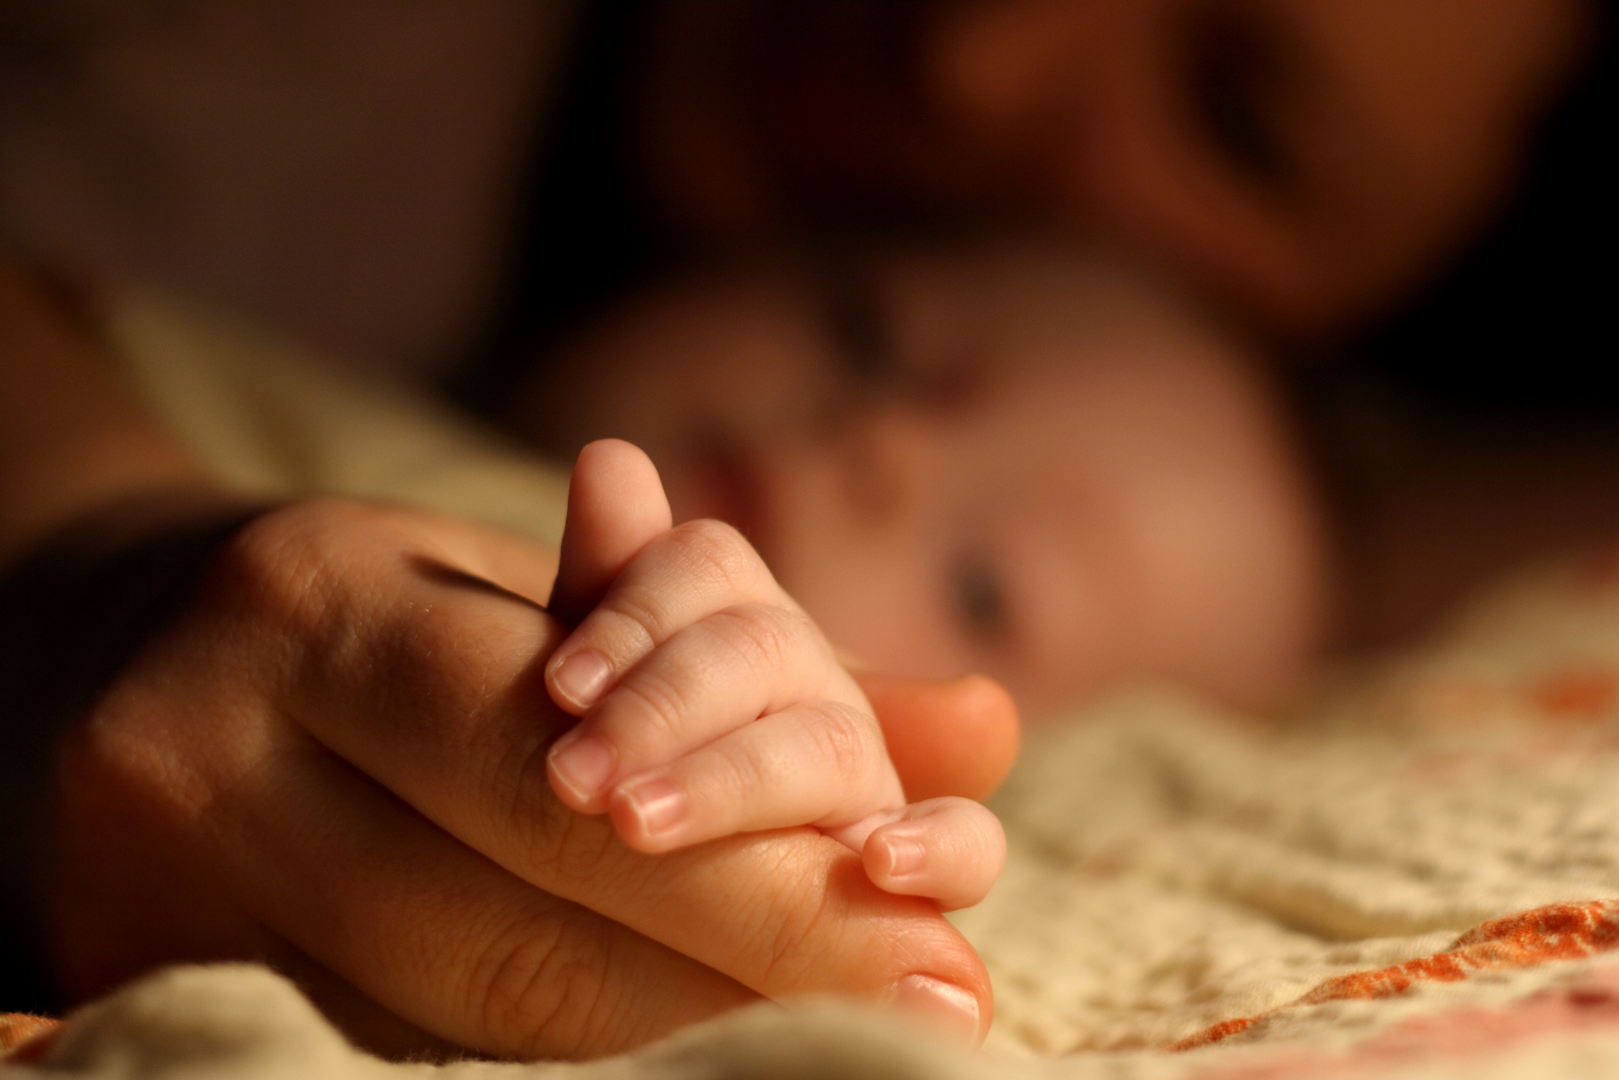 Is sleeping with your baby a good idea? Here's what the science says